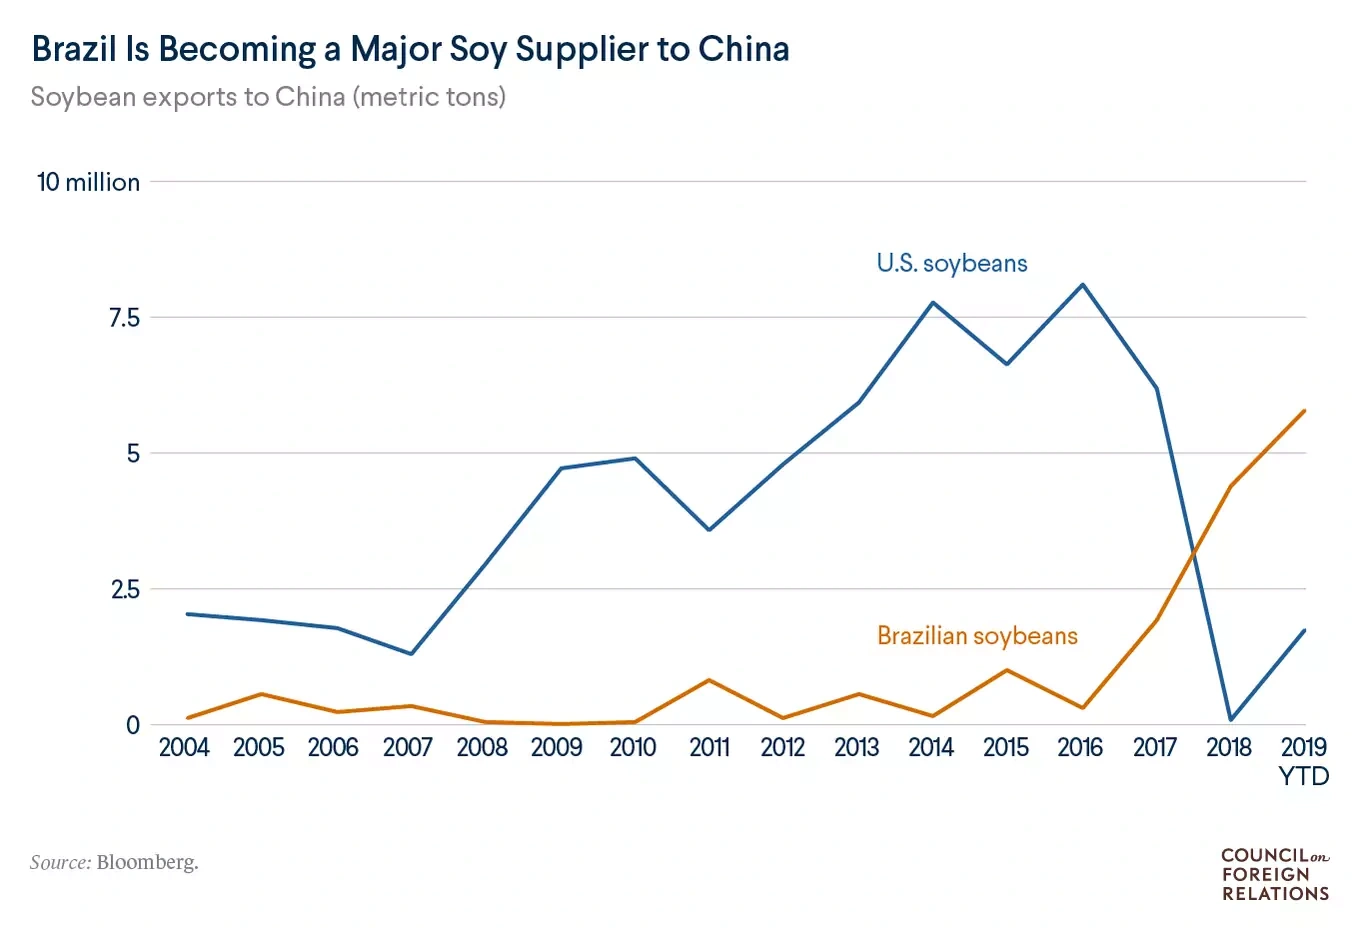 U.S. and Brazilian soybean exports to China 2004-2019